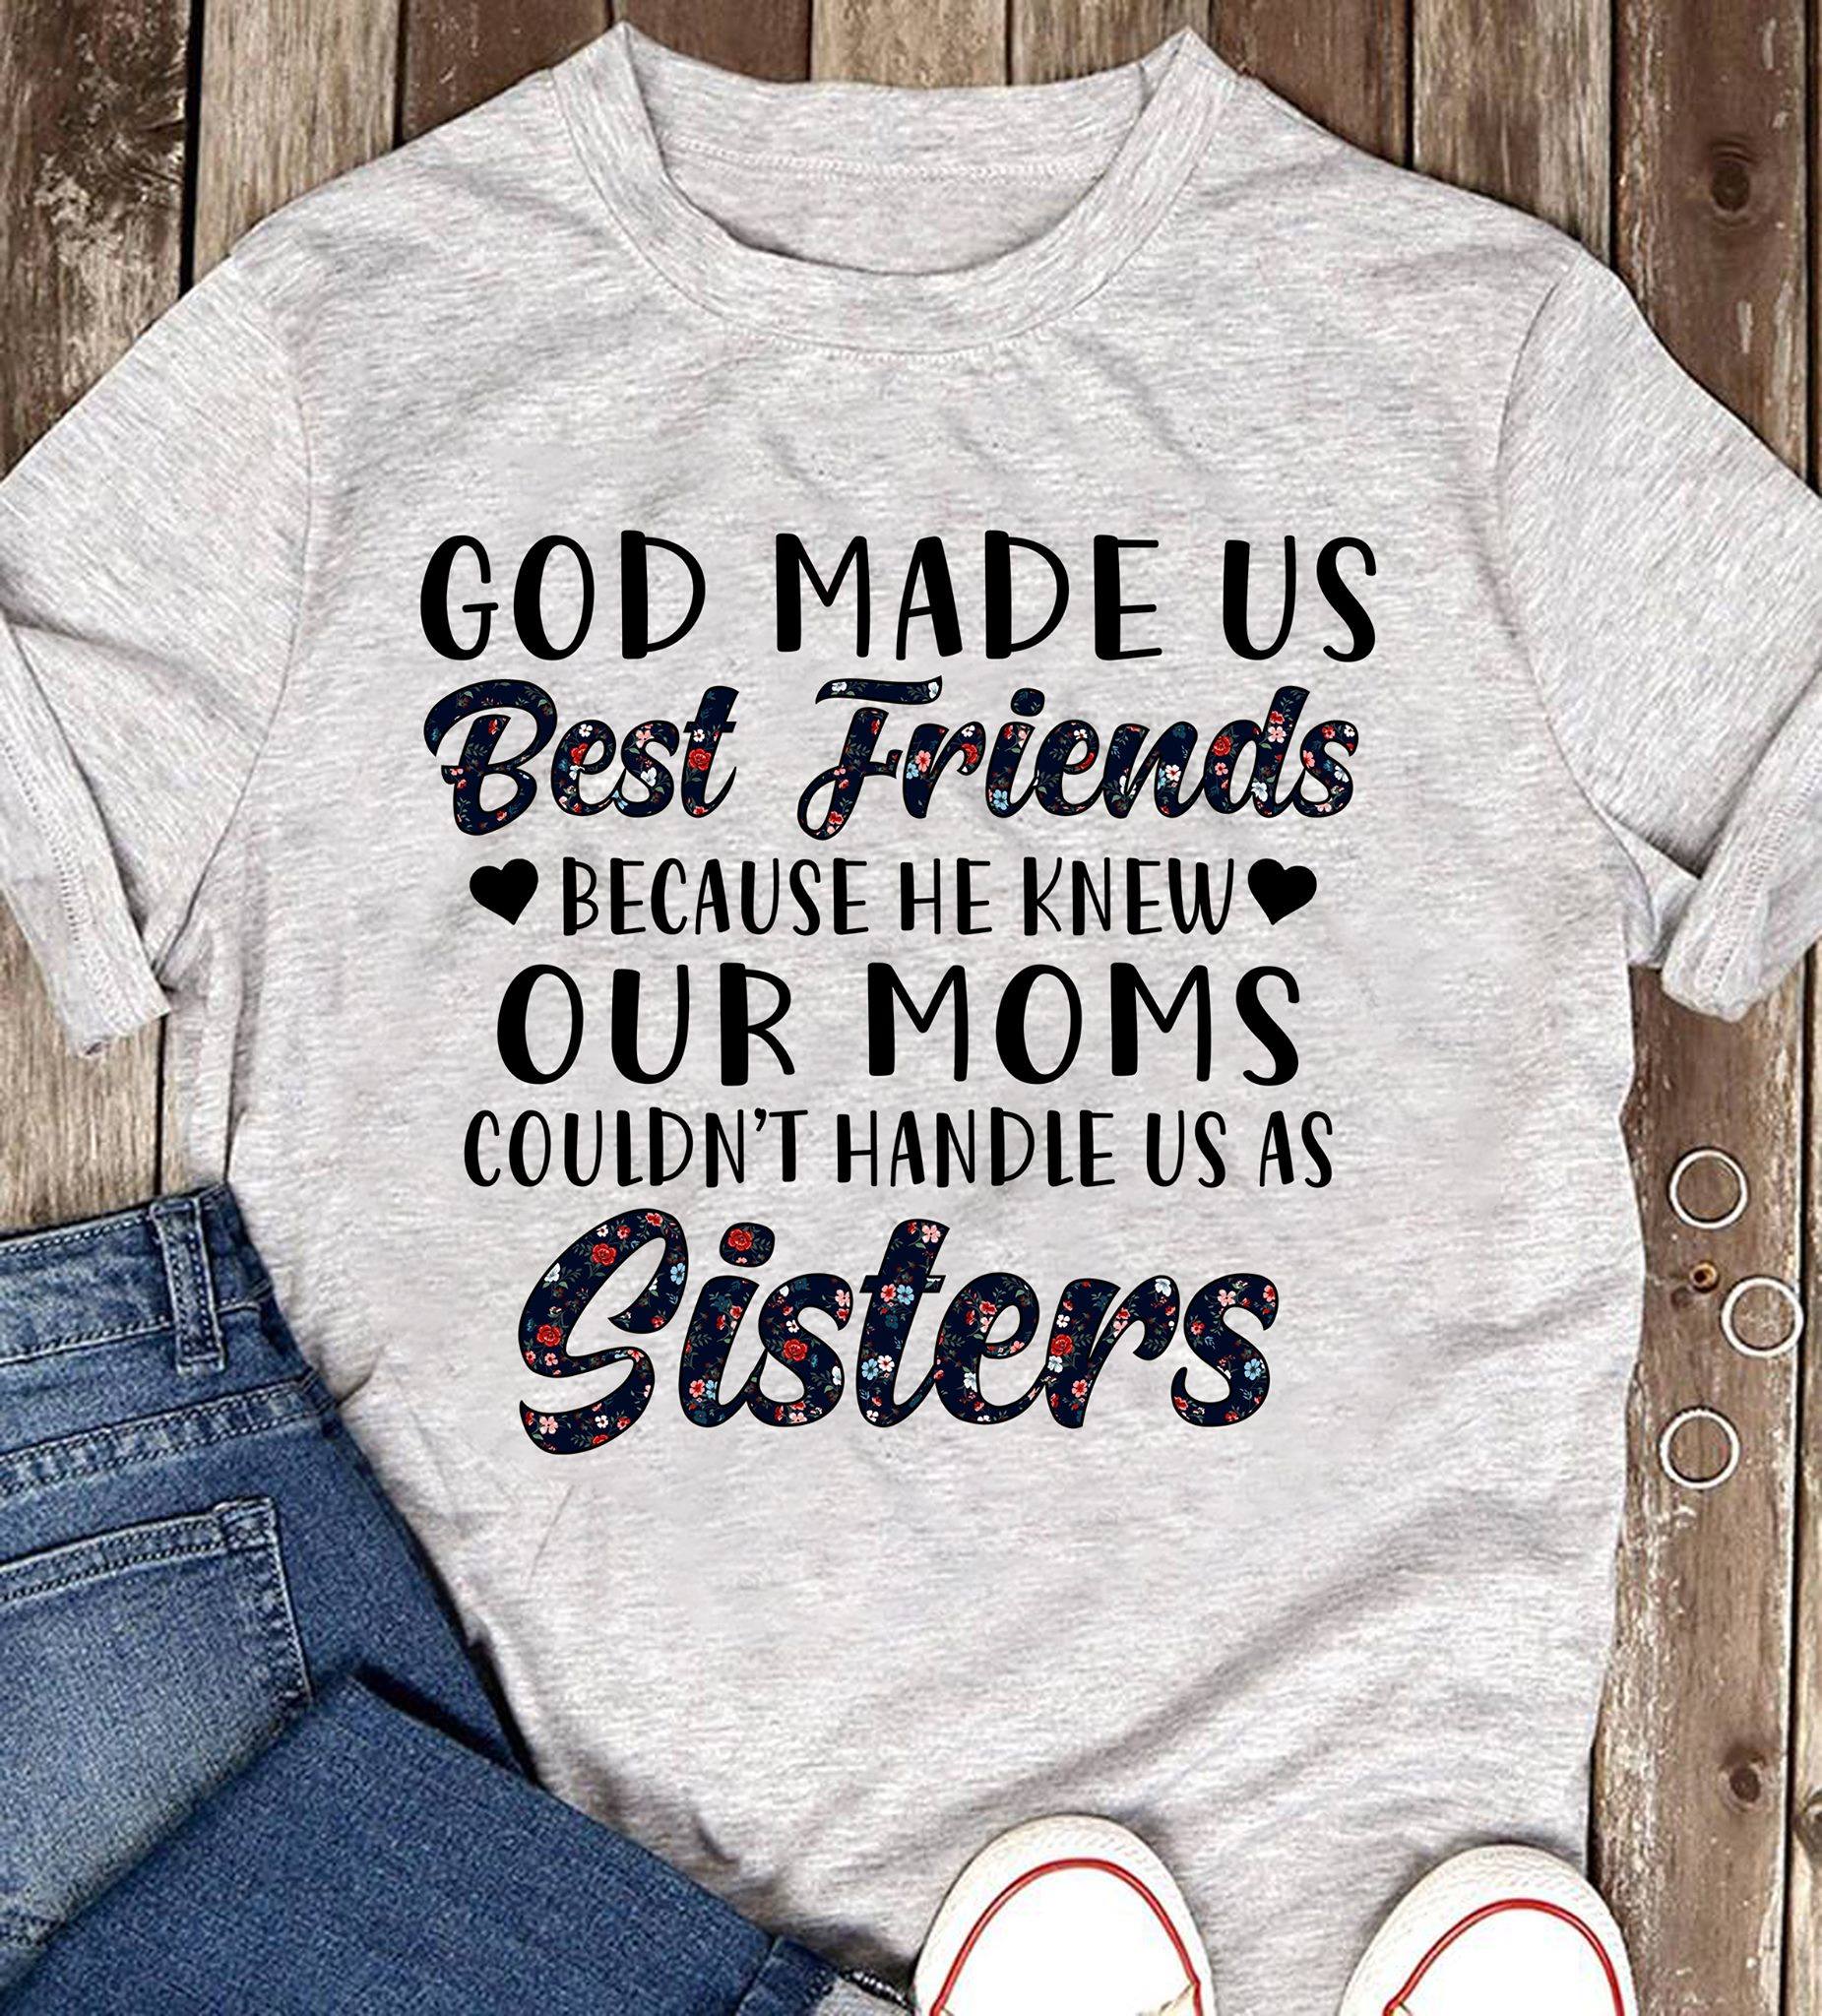 God made us best friends because he knew our moms couldn't handle us as sisters